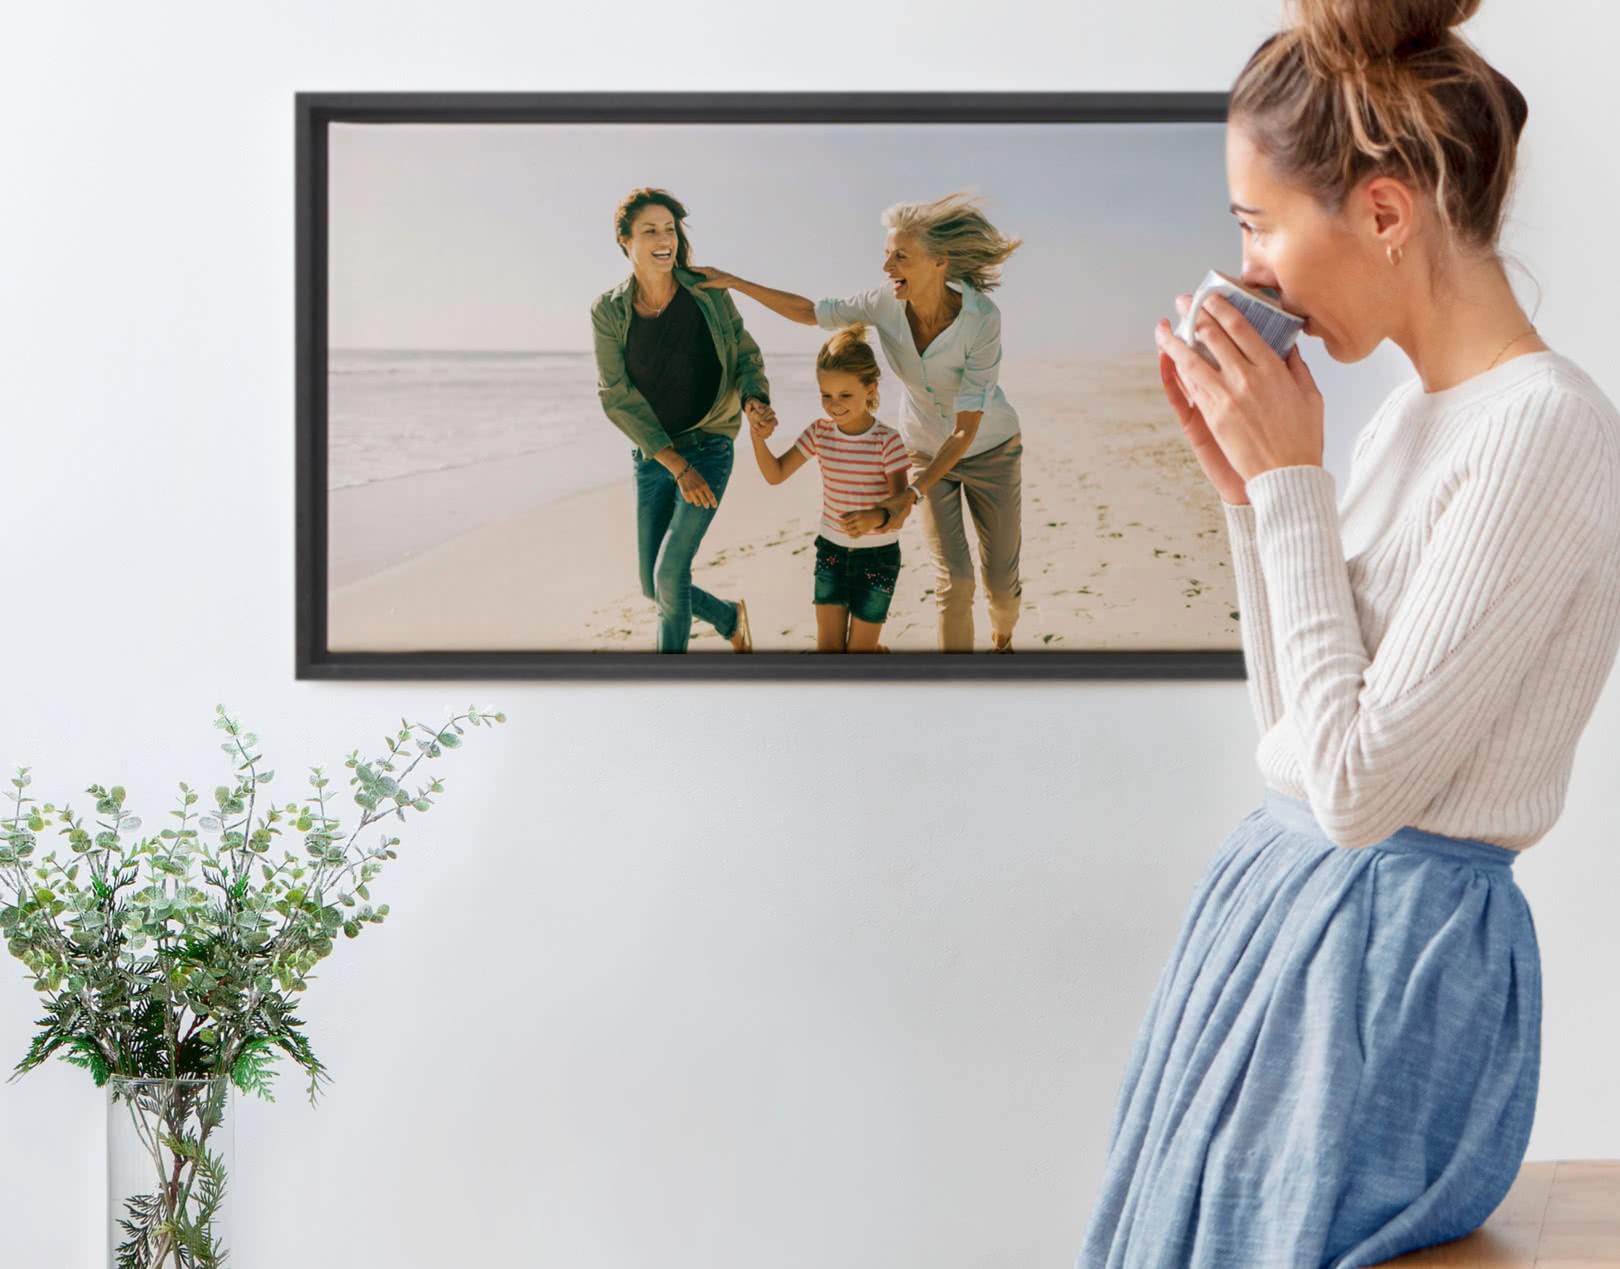 Wall Art Decor: From Personalized to Abstract Prints, There’s Something for Everyone